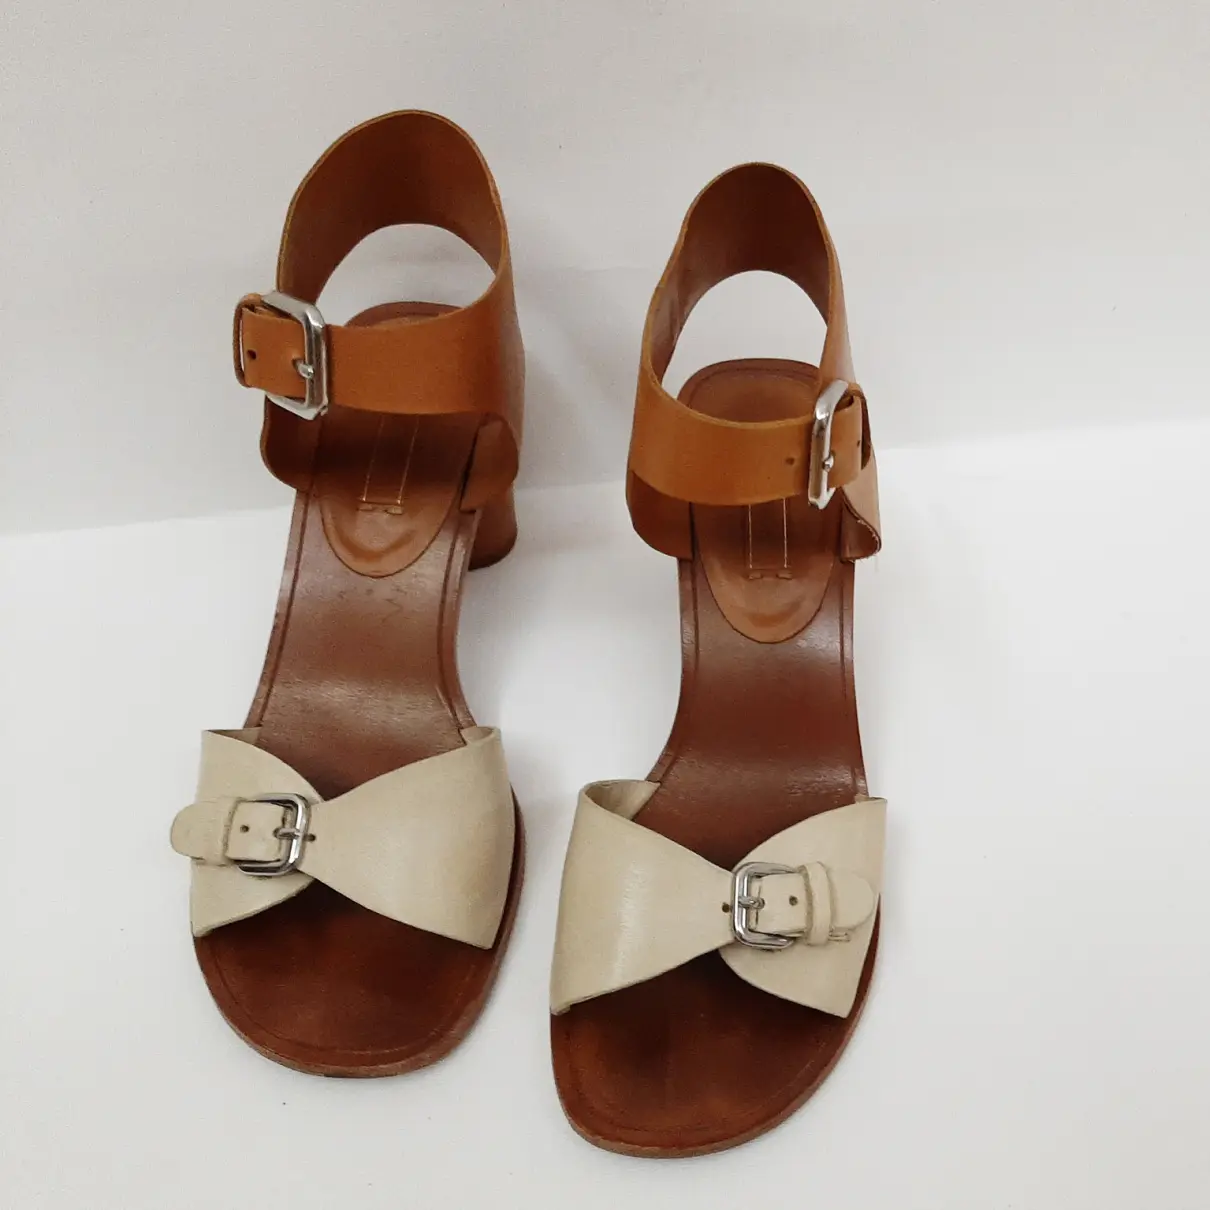 Buy Uterque Leather sandal online